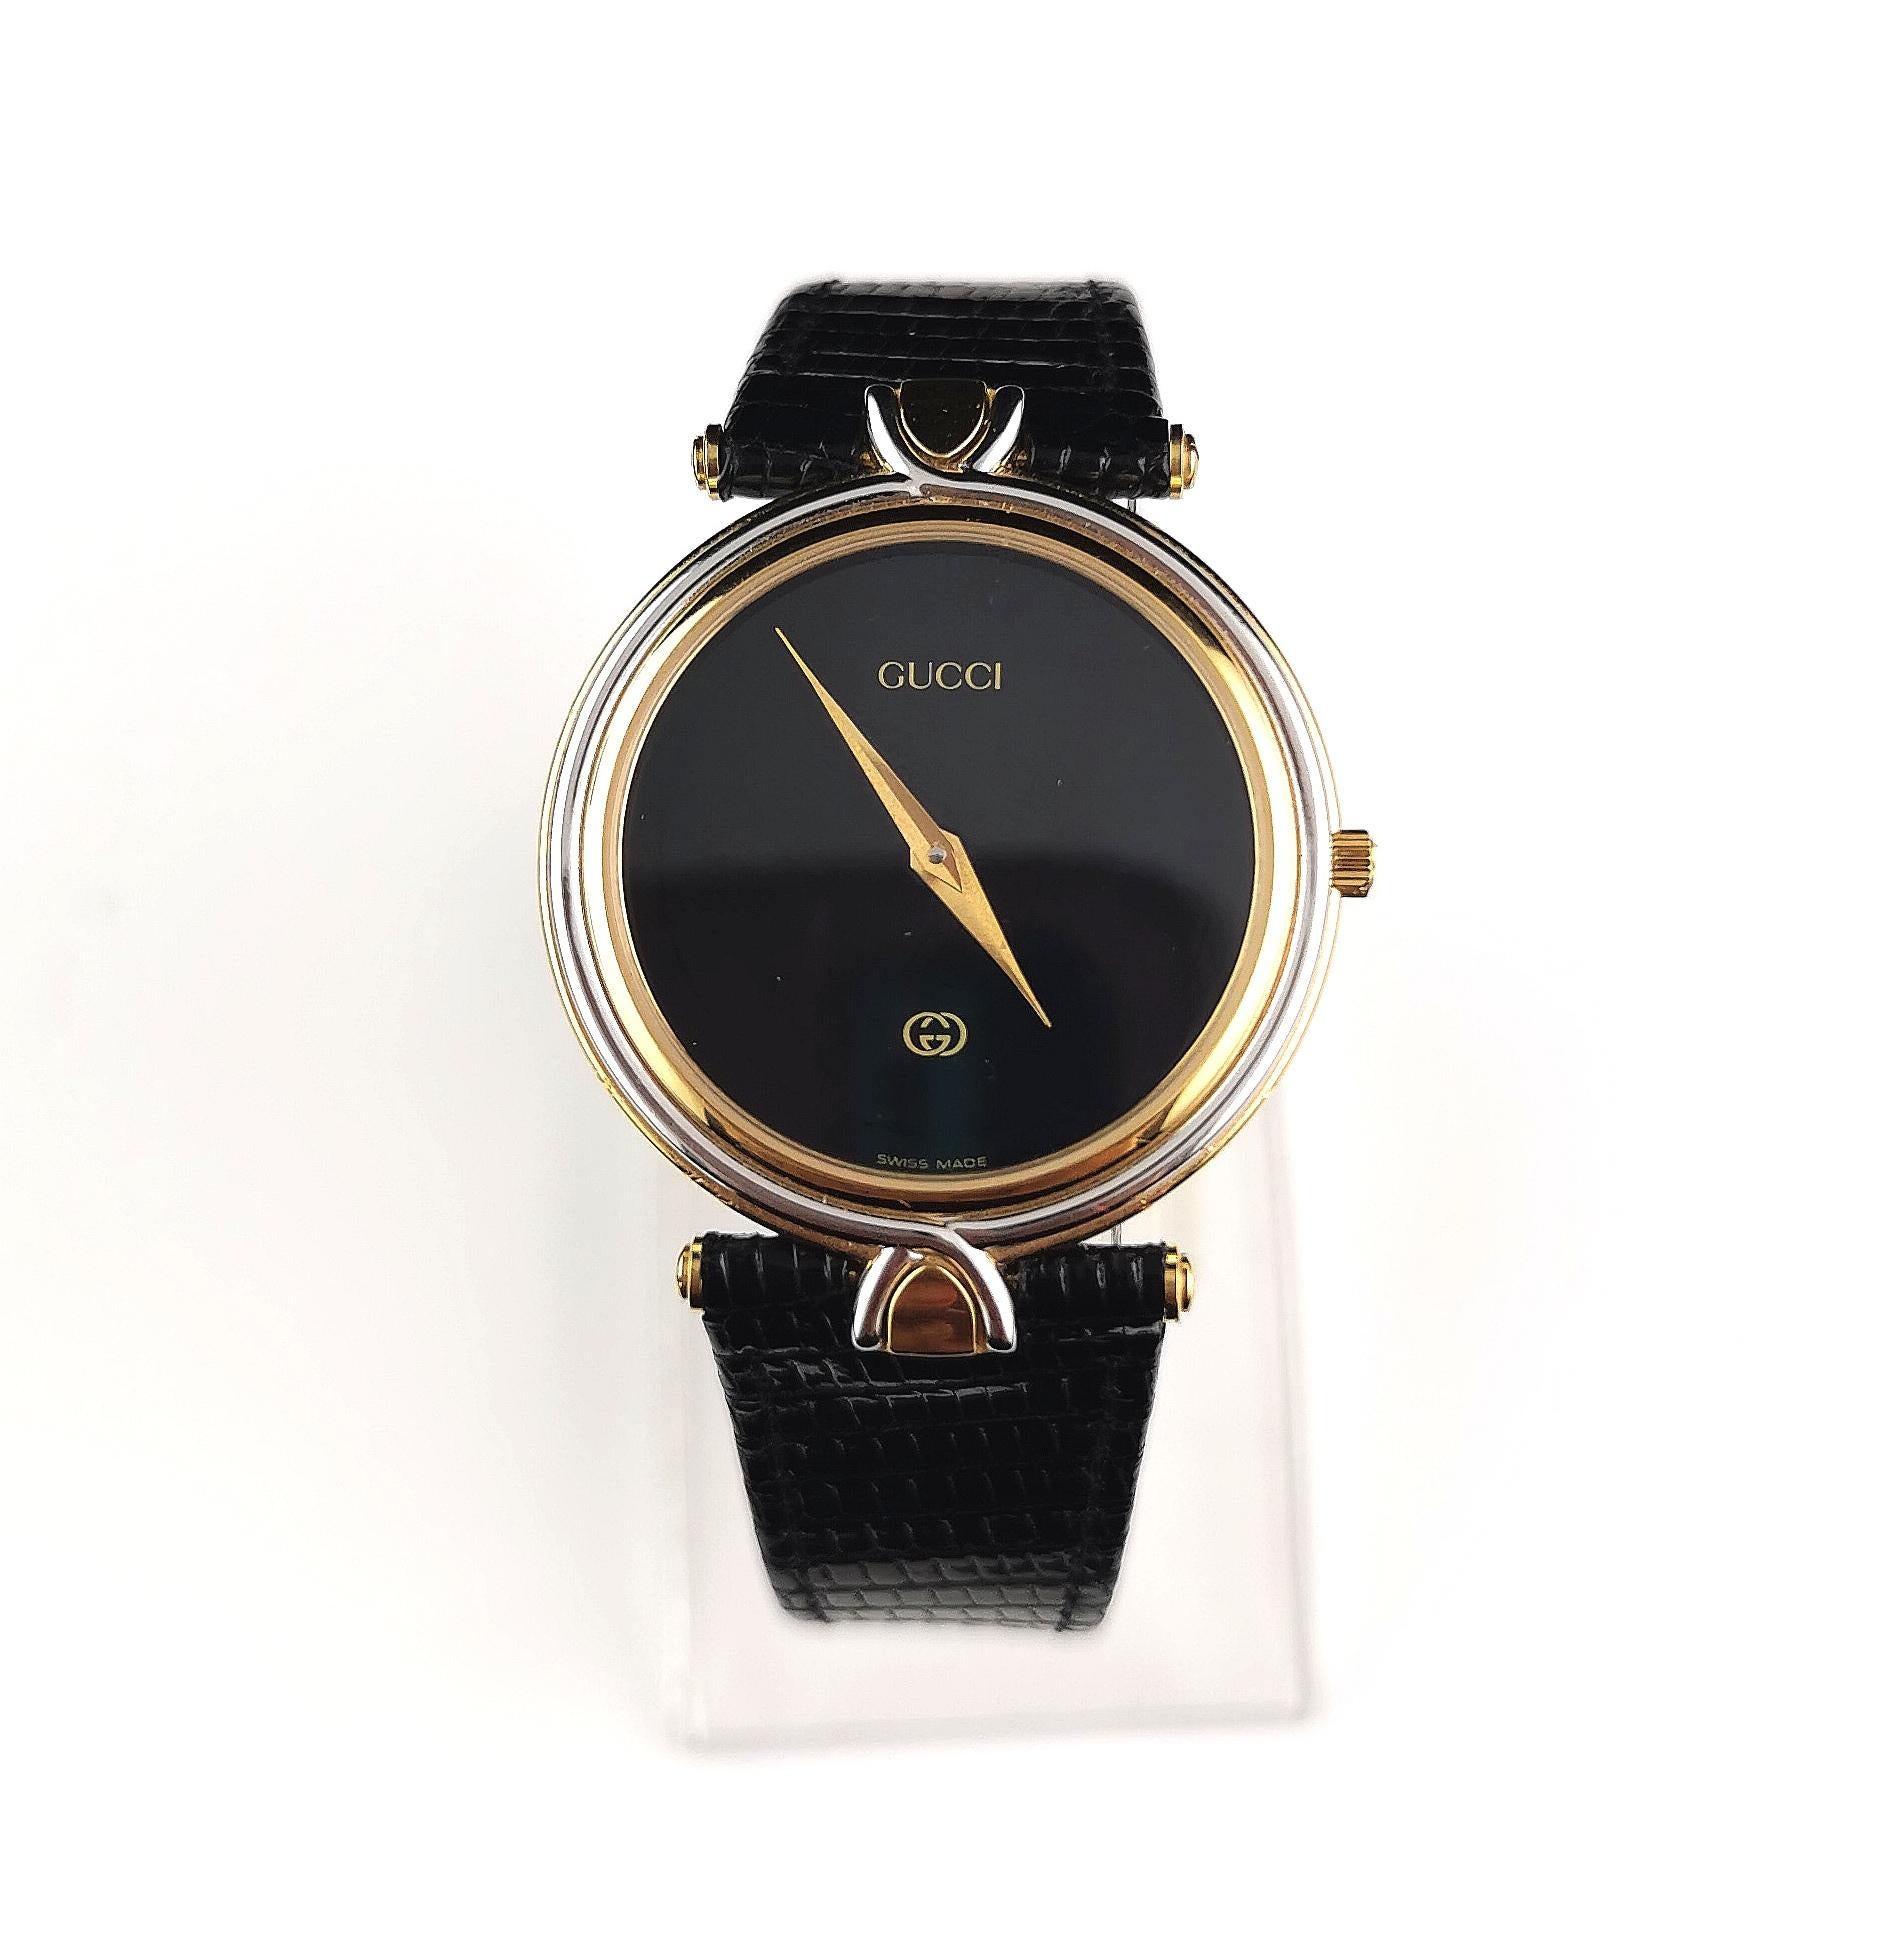 A stylish Gucci 4500M stainless steel and gold plated wristwatch.

This is a strap watch originally from the mens range but it will work for men or women, it has a large circular face with a black dial and gold lettering and logo, no numerals.

The